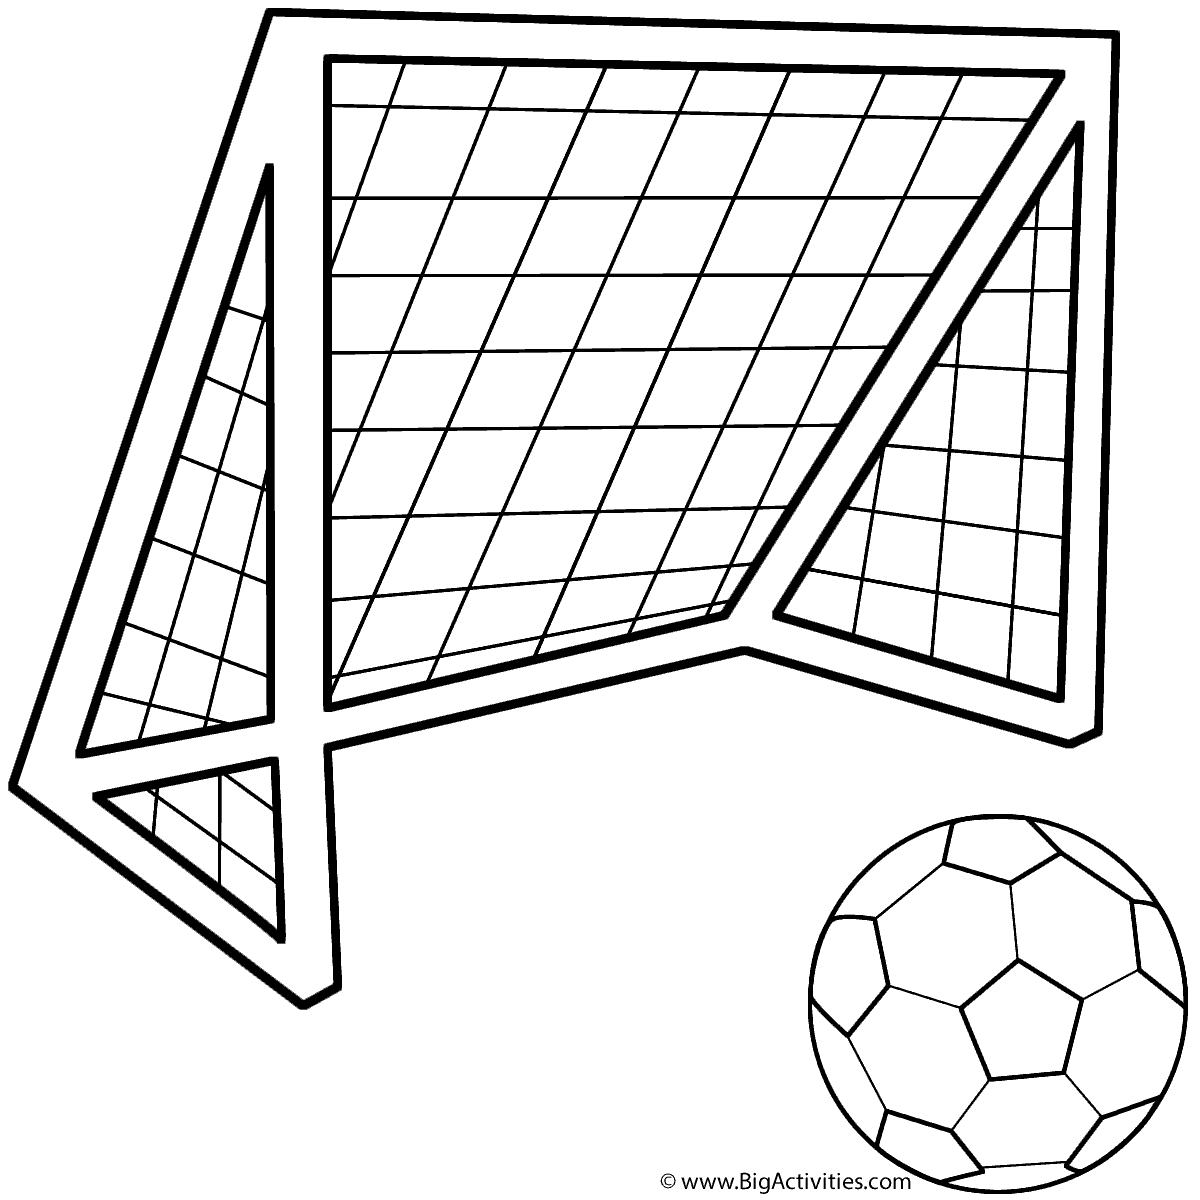 Download Soccer Ball with Soccer Net - Coloring Page (Sports)